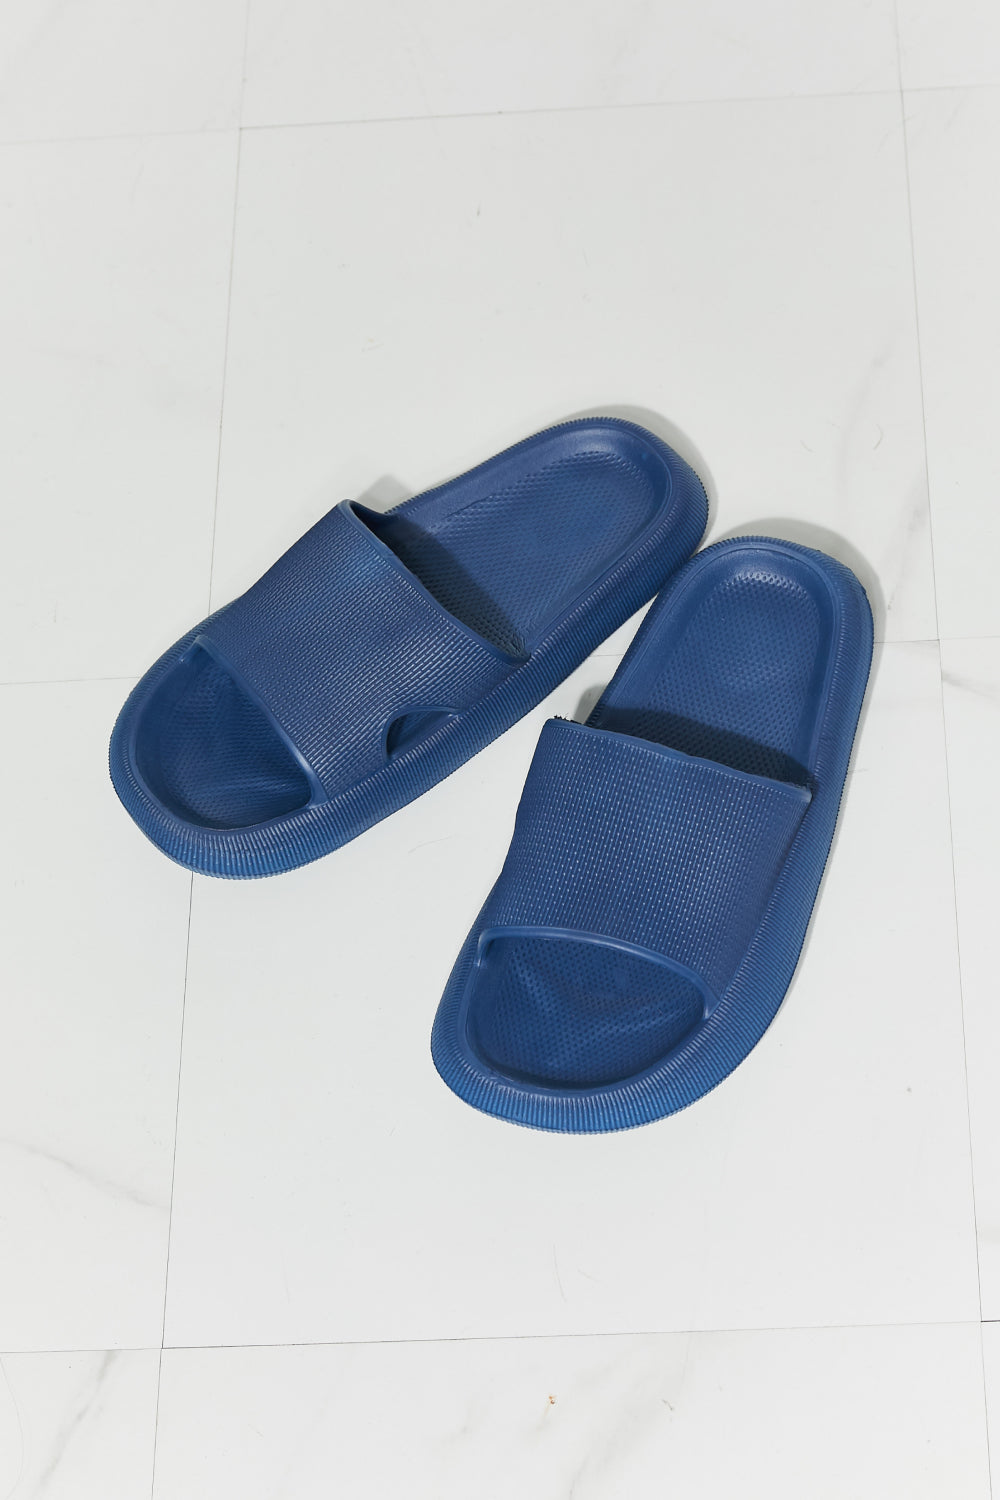 MMShoes Arms Around Me Open Toe Slide in Navy - Online Only